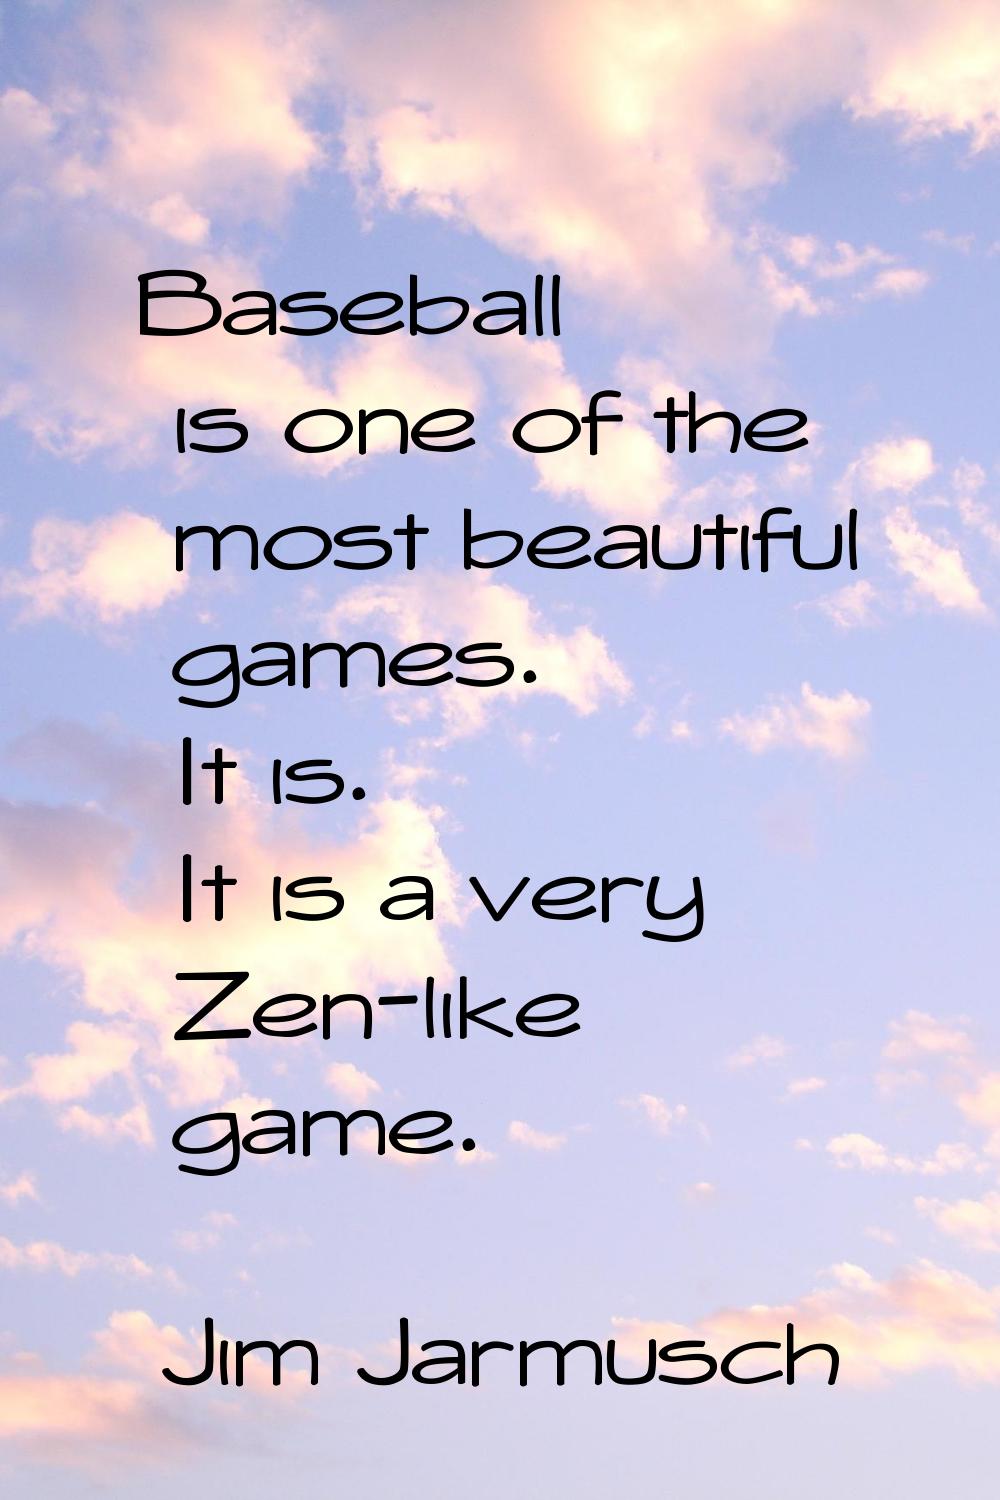 Baseball is one of the most beautiful games. It is. It is a very Zen-like game.